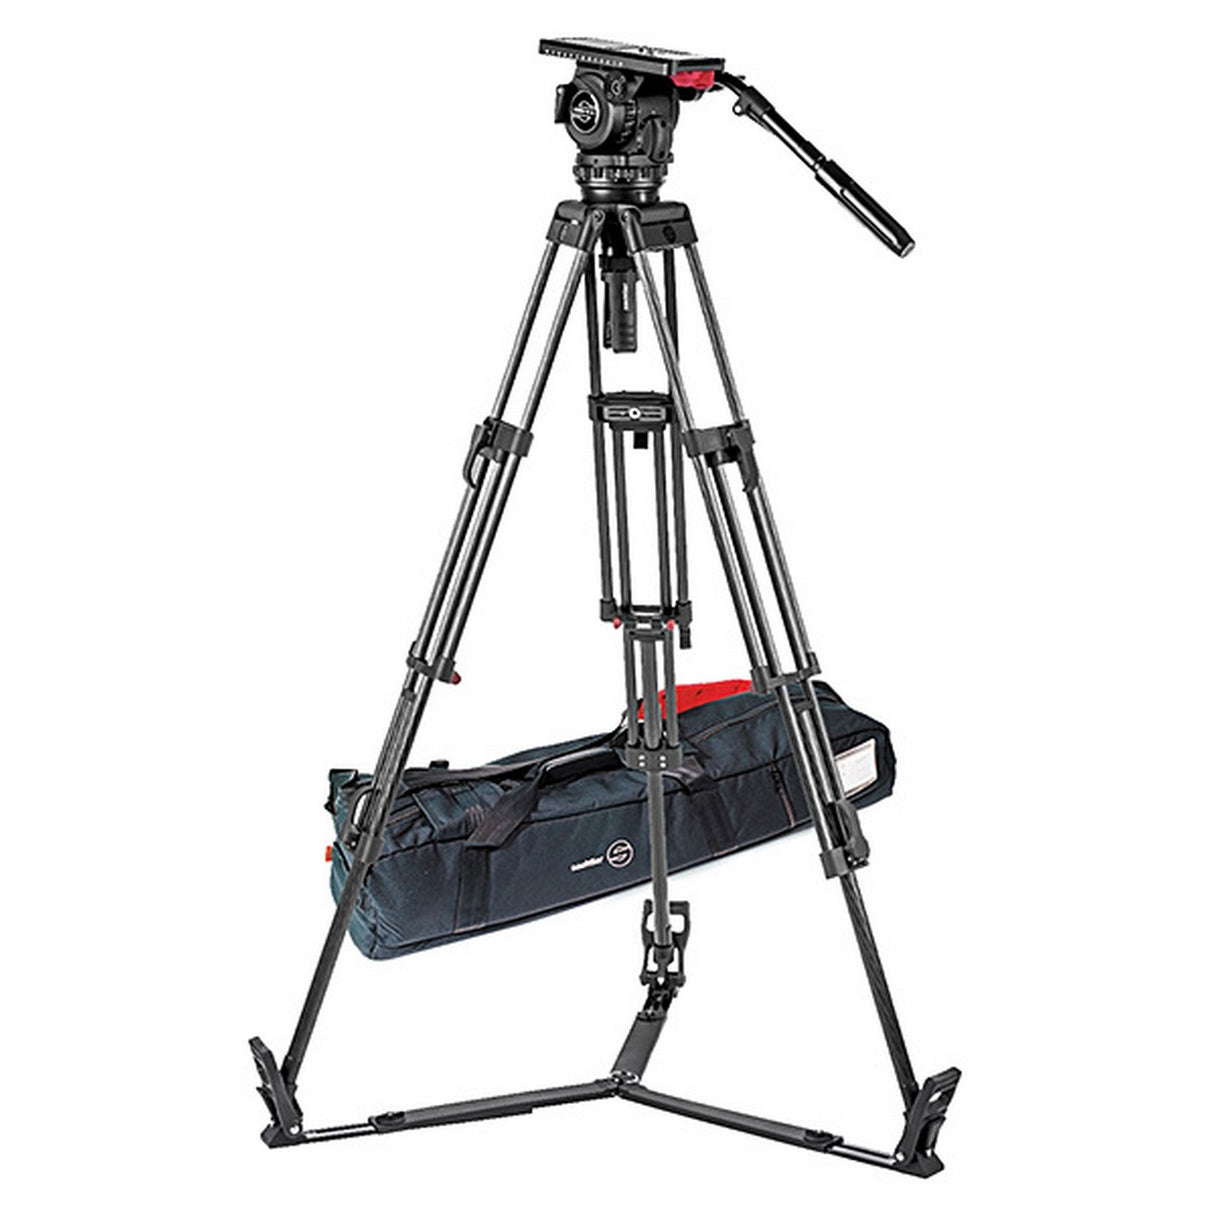 Sachtler System 18 S2 ENG 2 CF | Fluid Head Tripod System with Ground Spreader